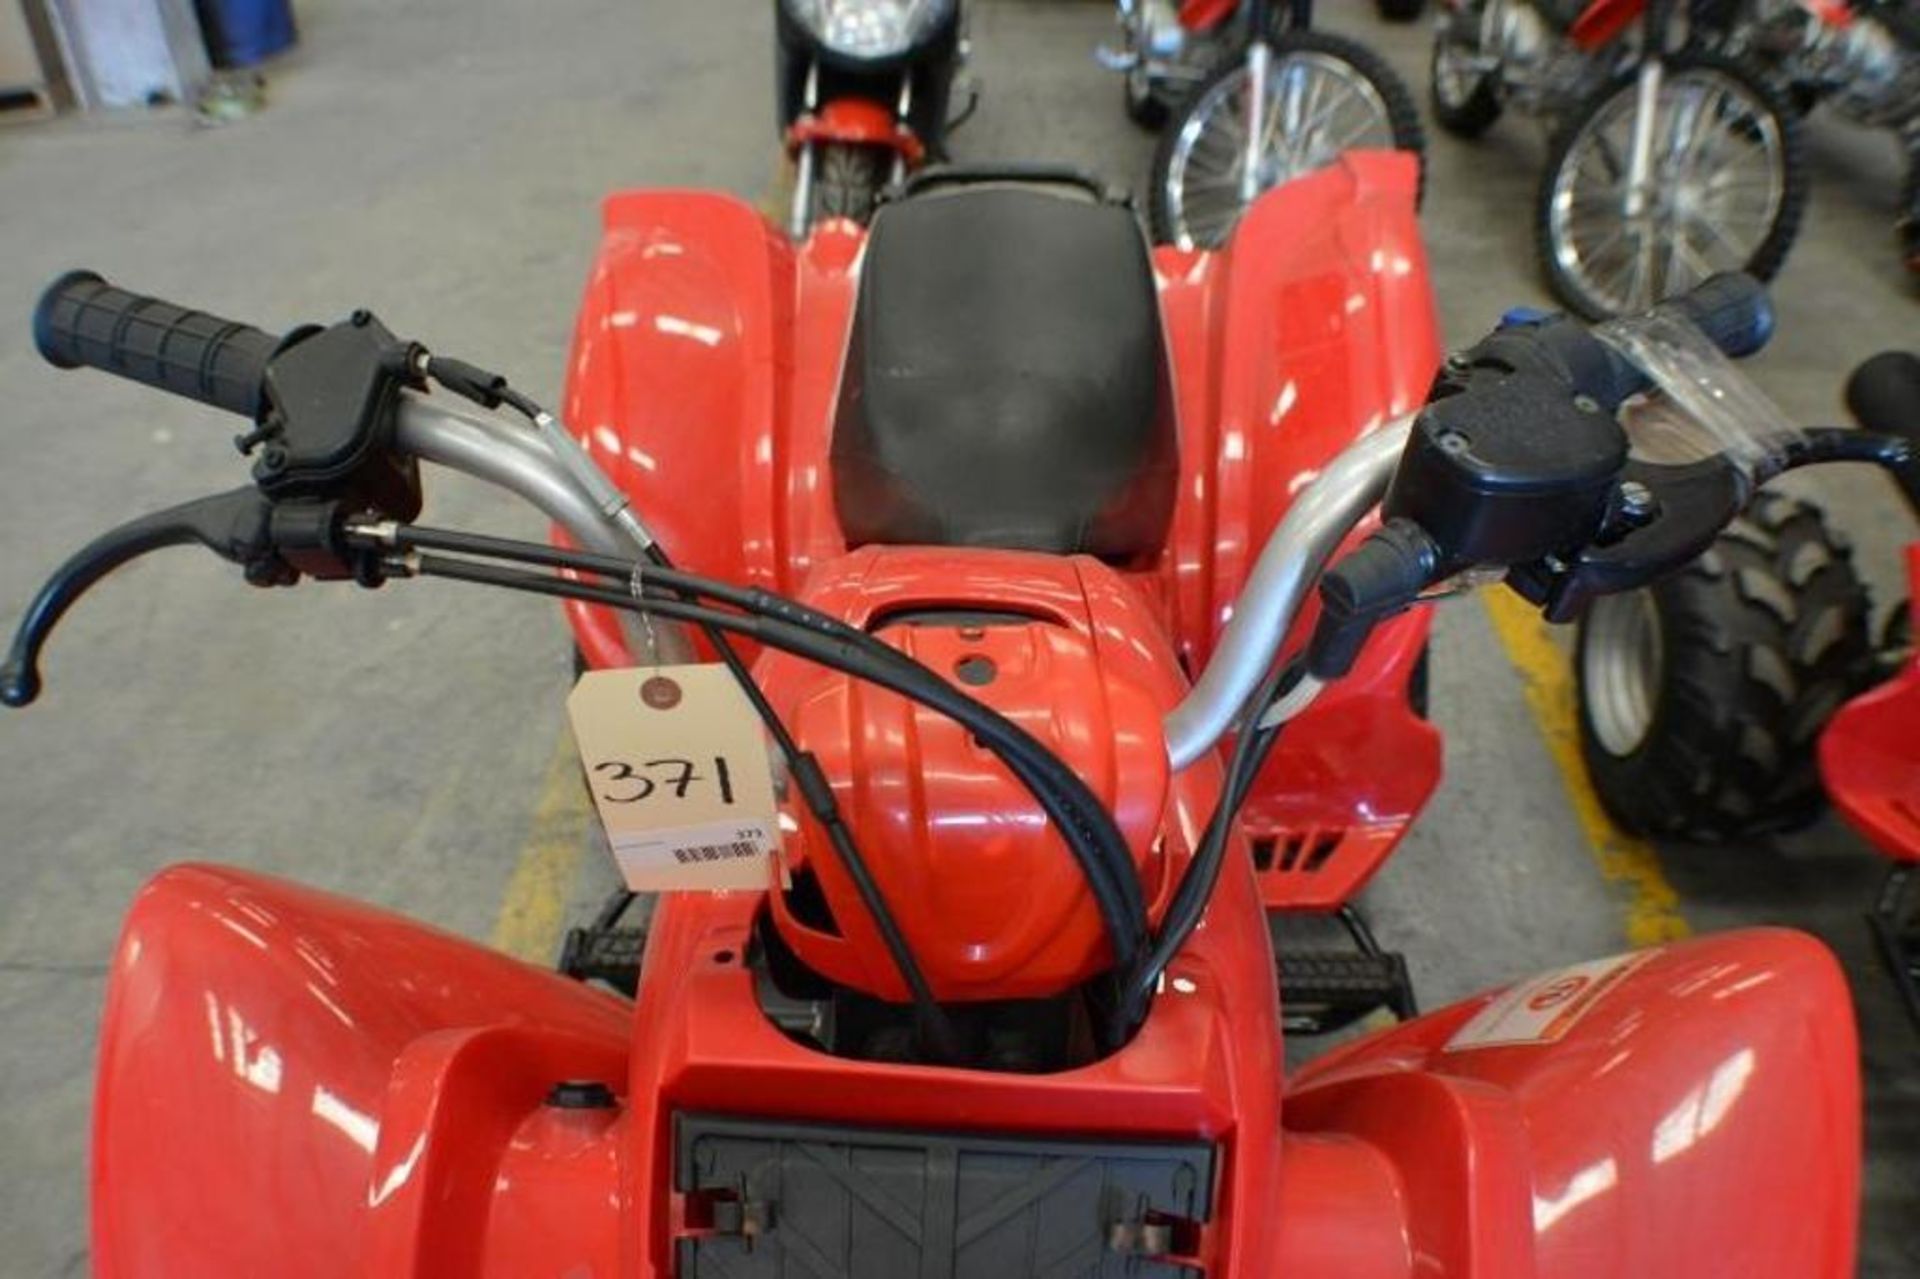 ATV 150cc 4 Stroke. Red Color. For Repair. This unit are for EXPORT ONLY. Buyers acknowledges is for - Image 4 of 11